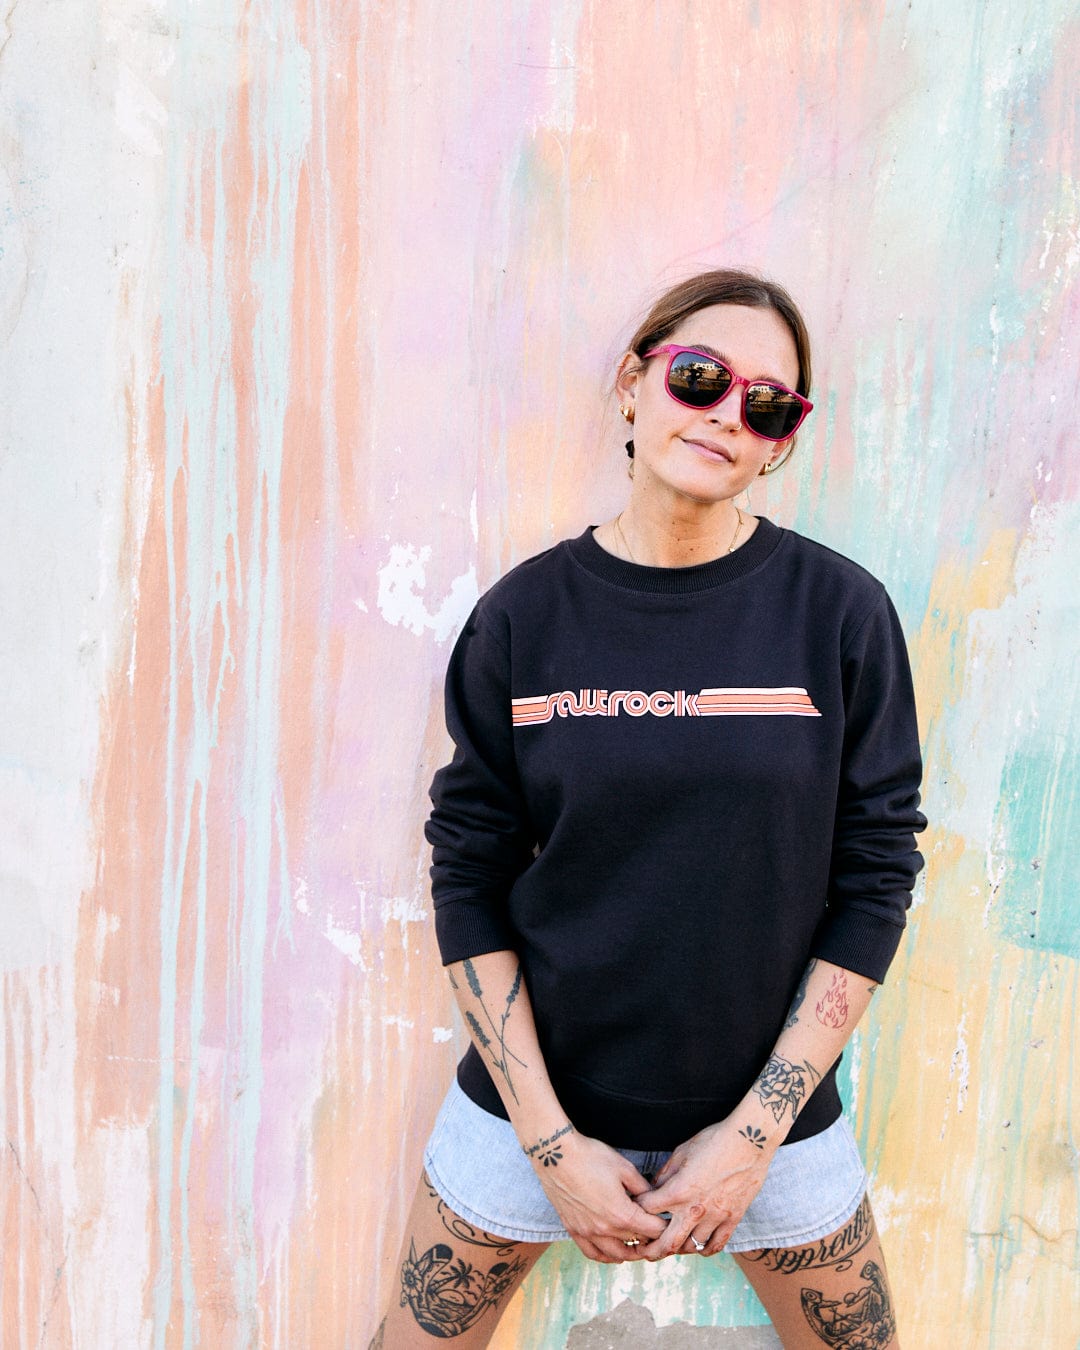 A woman in a Saltrock Retro Ribbon Tape - Womens Sweatshirt - Dark Grey and sunglasses stands confidently against a colorful, abstract mural.